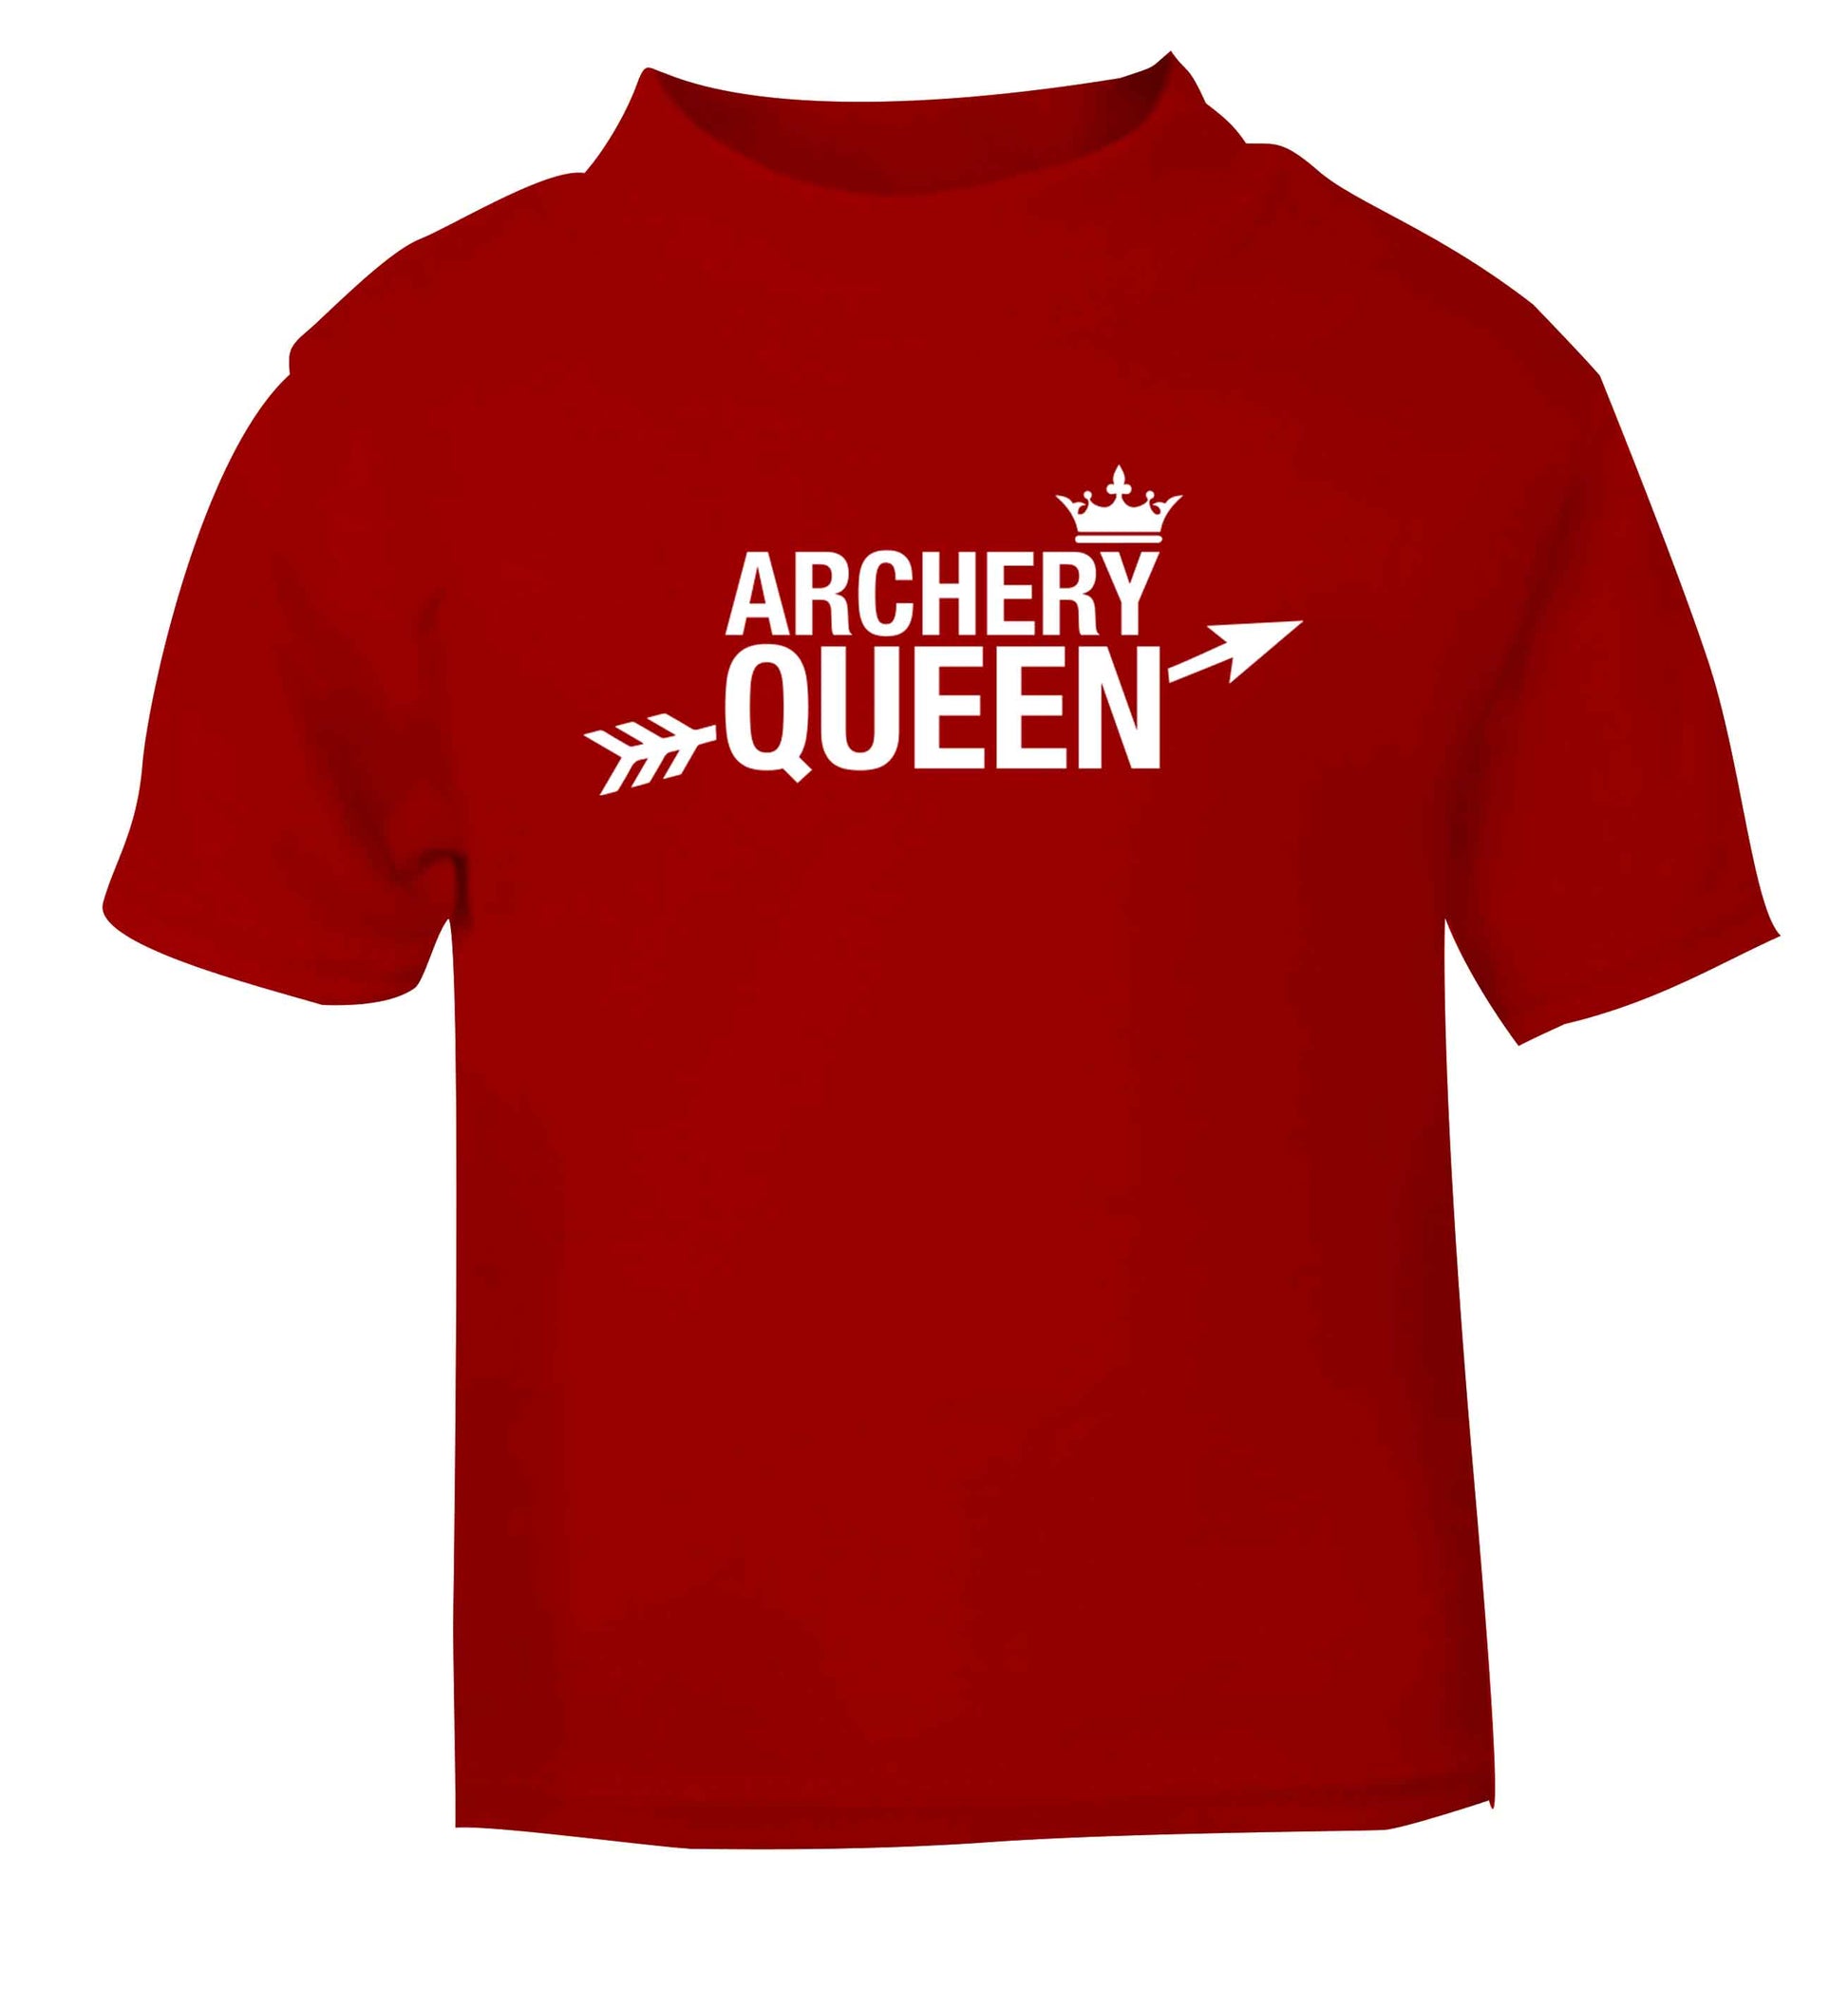 Archery queen red Baby Toddler Tshirt 2 Years